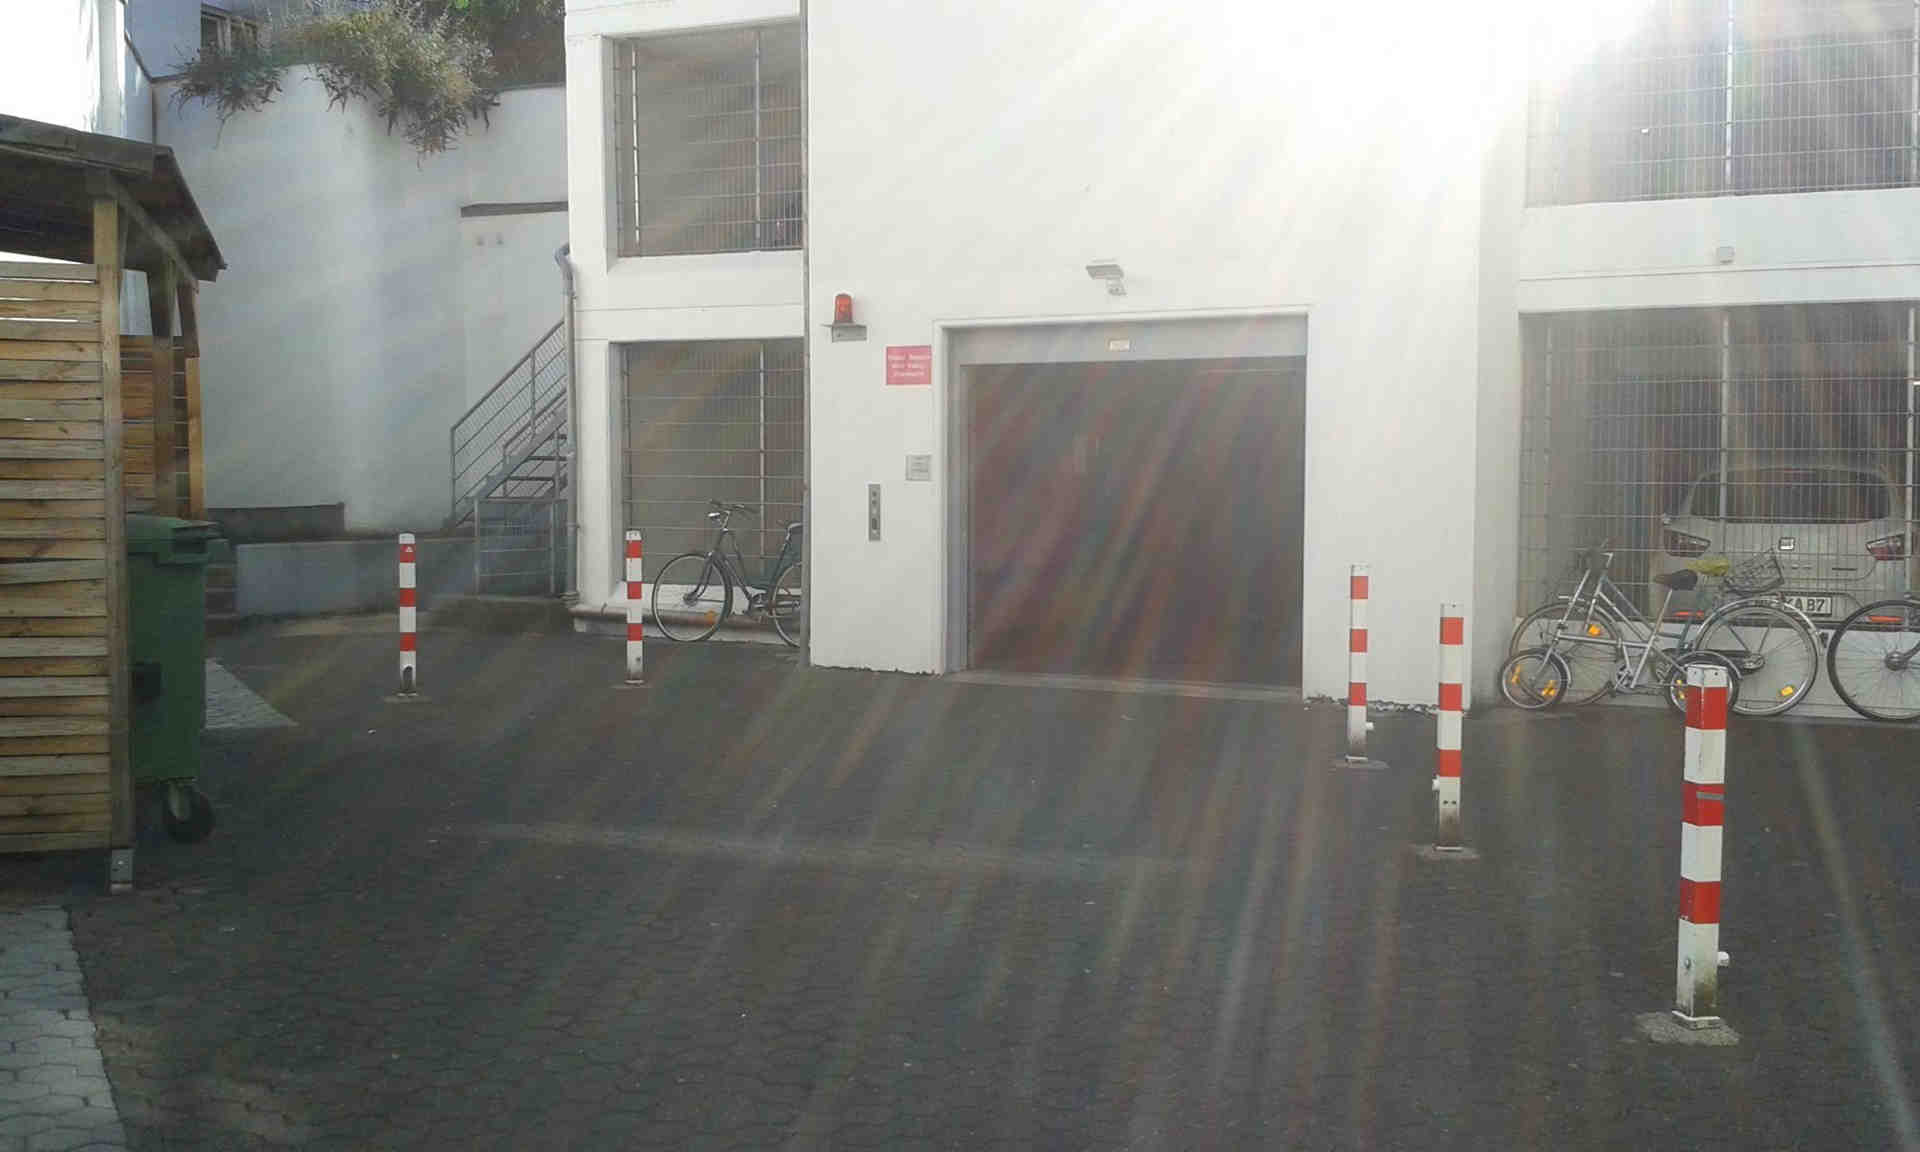 Parking space/garage in the basement in Cologne city centre (Zülpi/Barba) - Mauritiuswall, 50676 Cologne - Photo 1 of 3